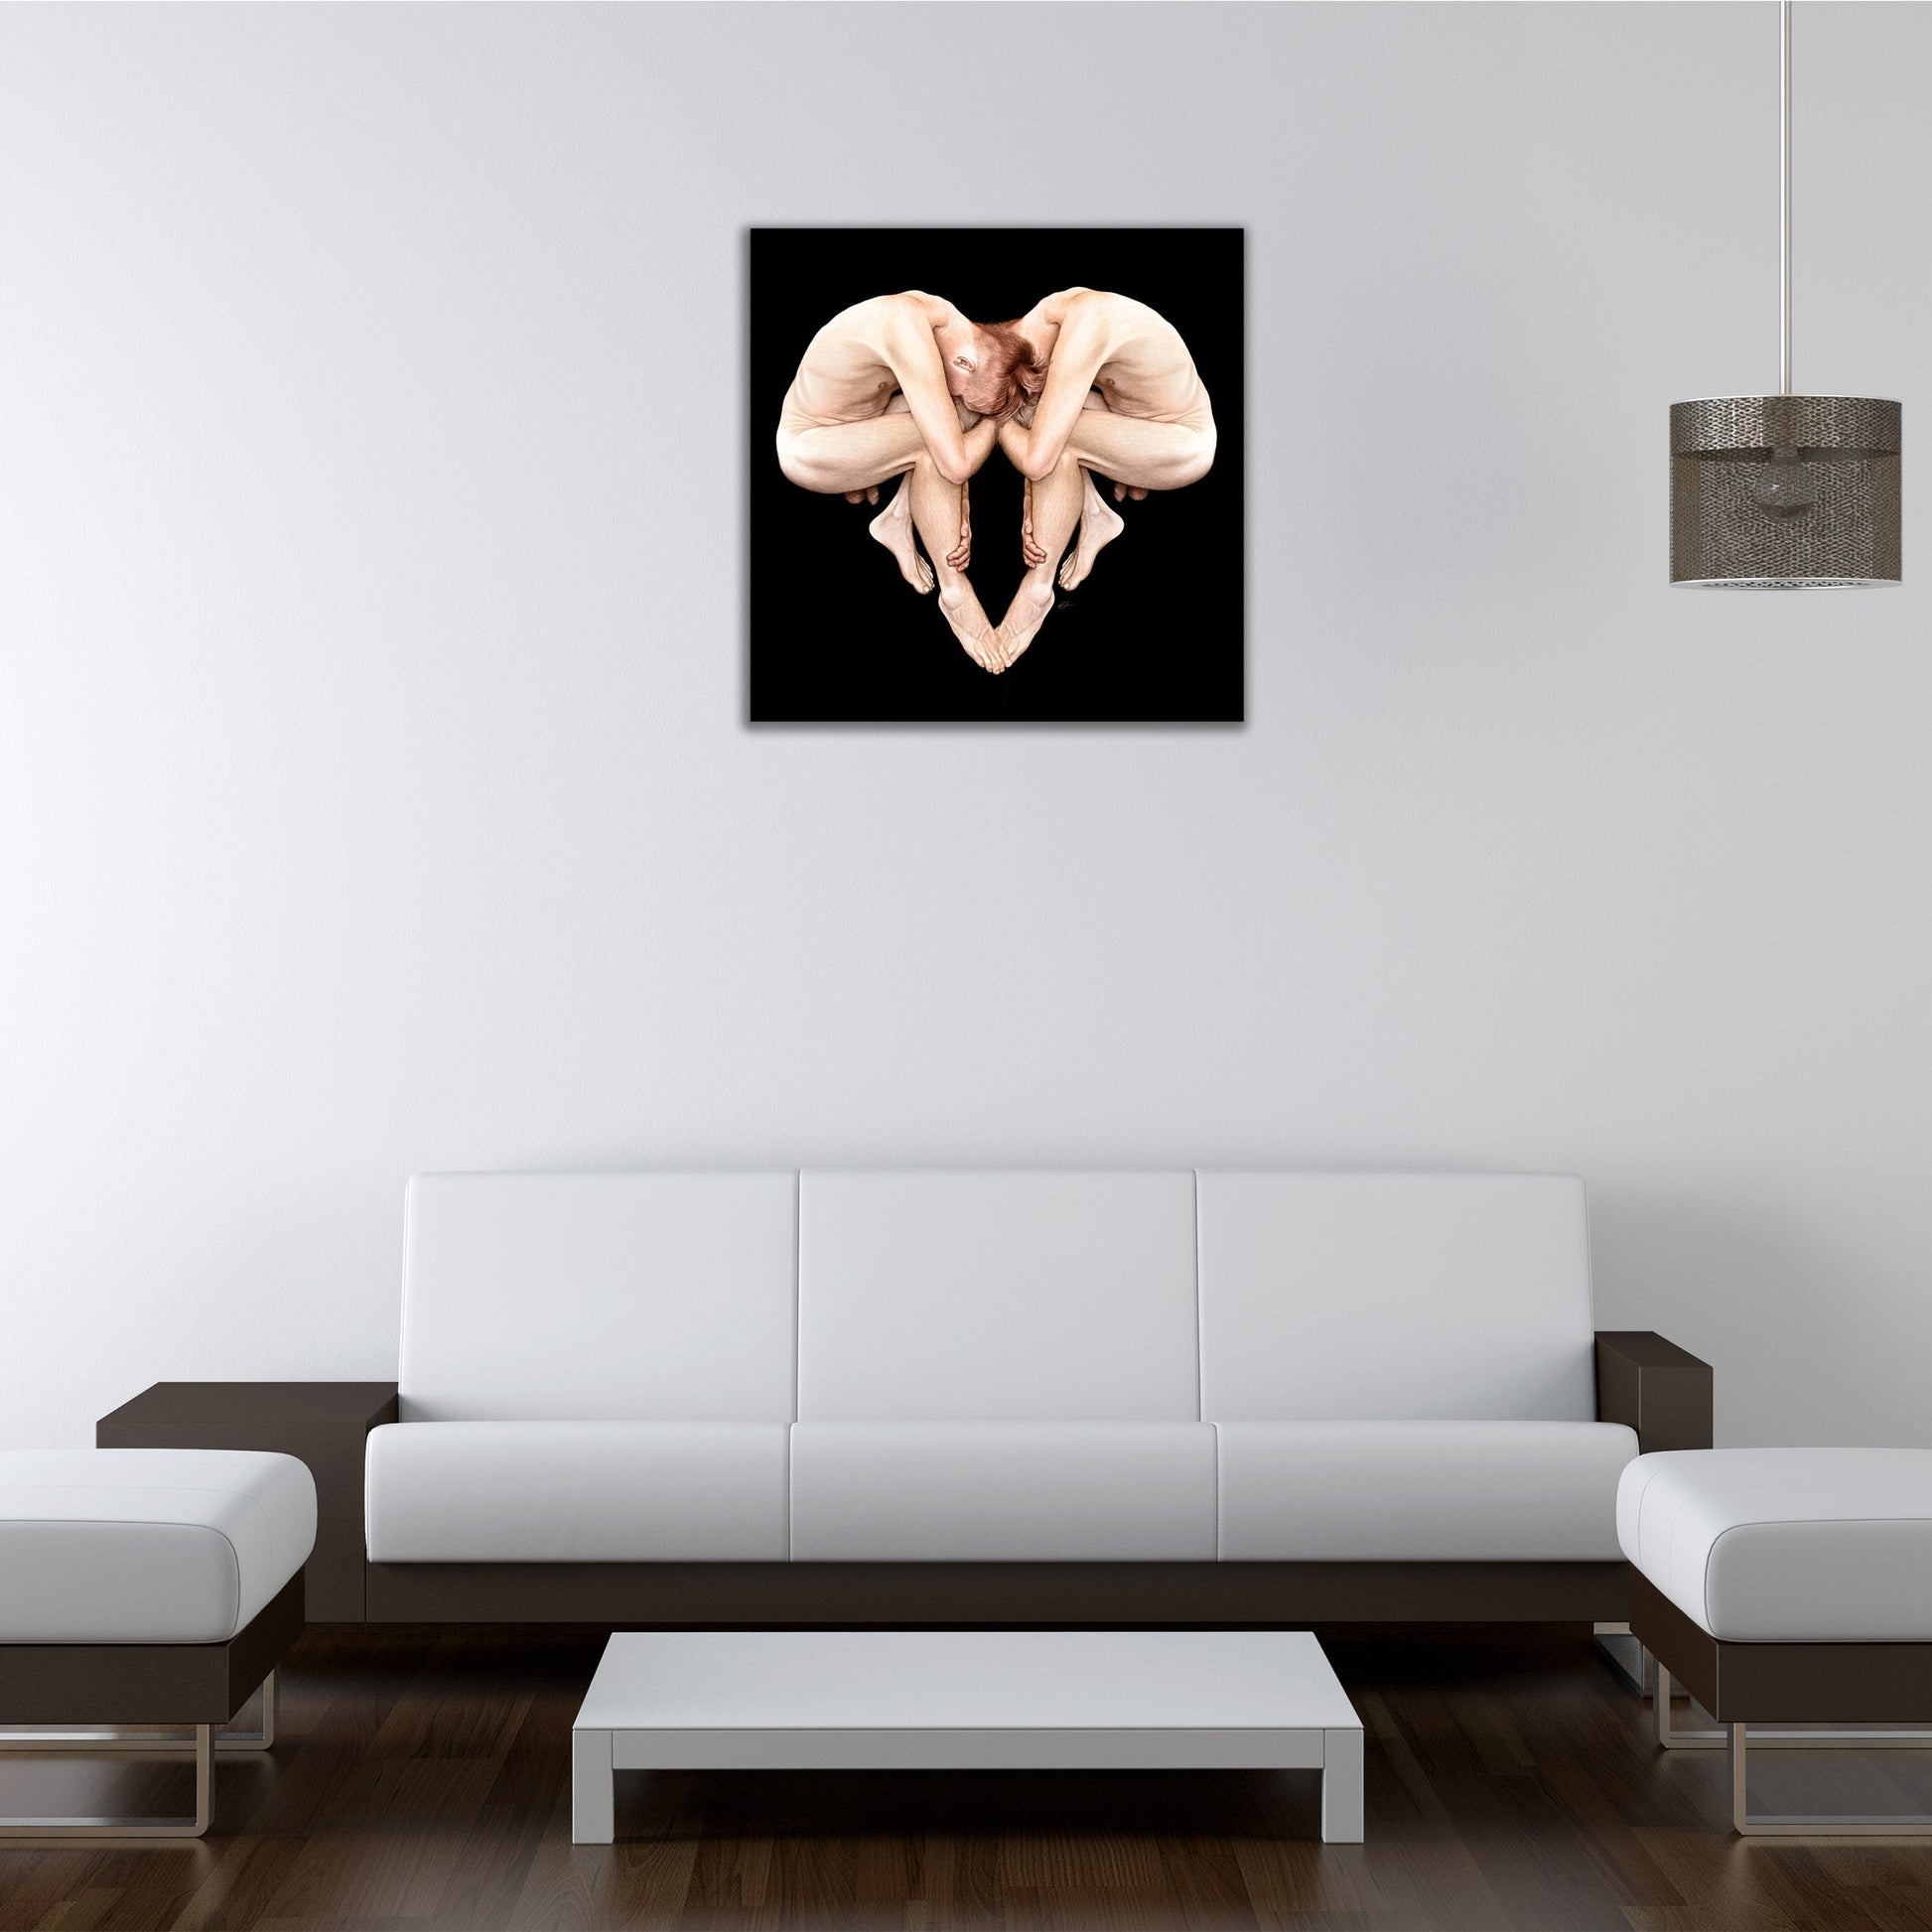 METAL Naked Heart - LIMITED EDITION METAL PRINT (1 of 3) - Danny Branscombe